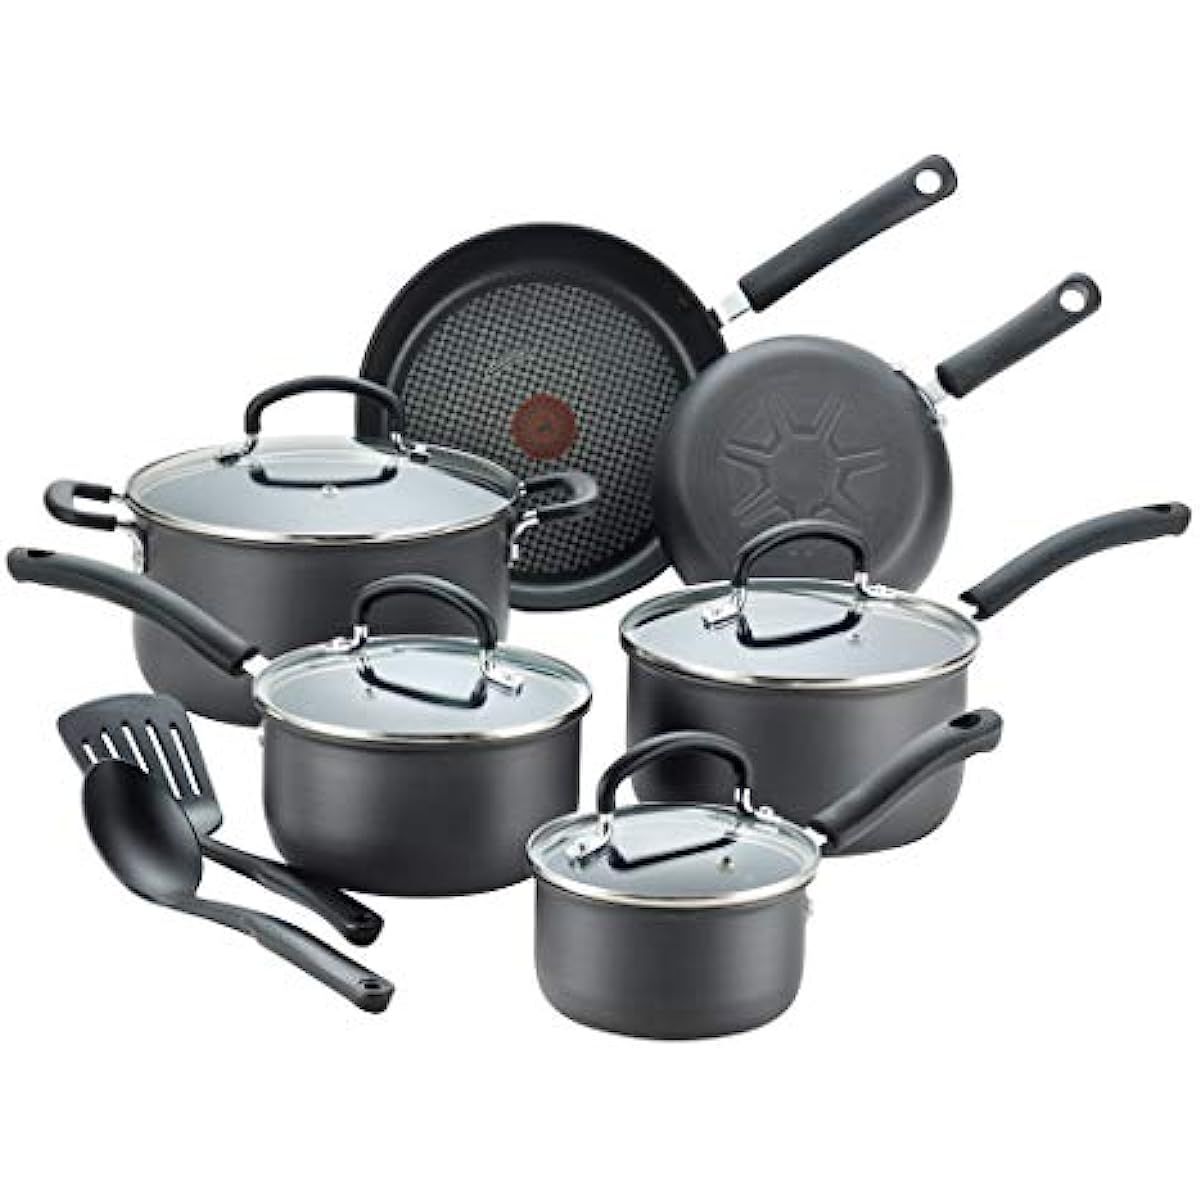 T Fal Ultimate Hard Anodized Nonstick Cookware Set Pots And Pans